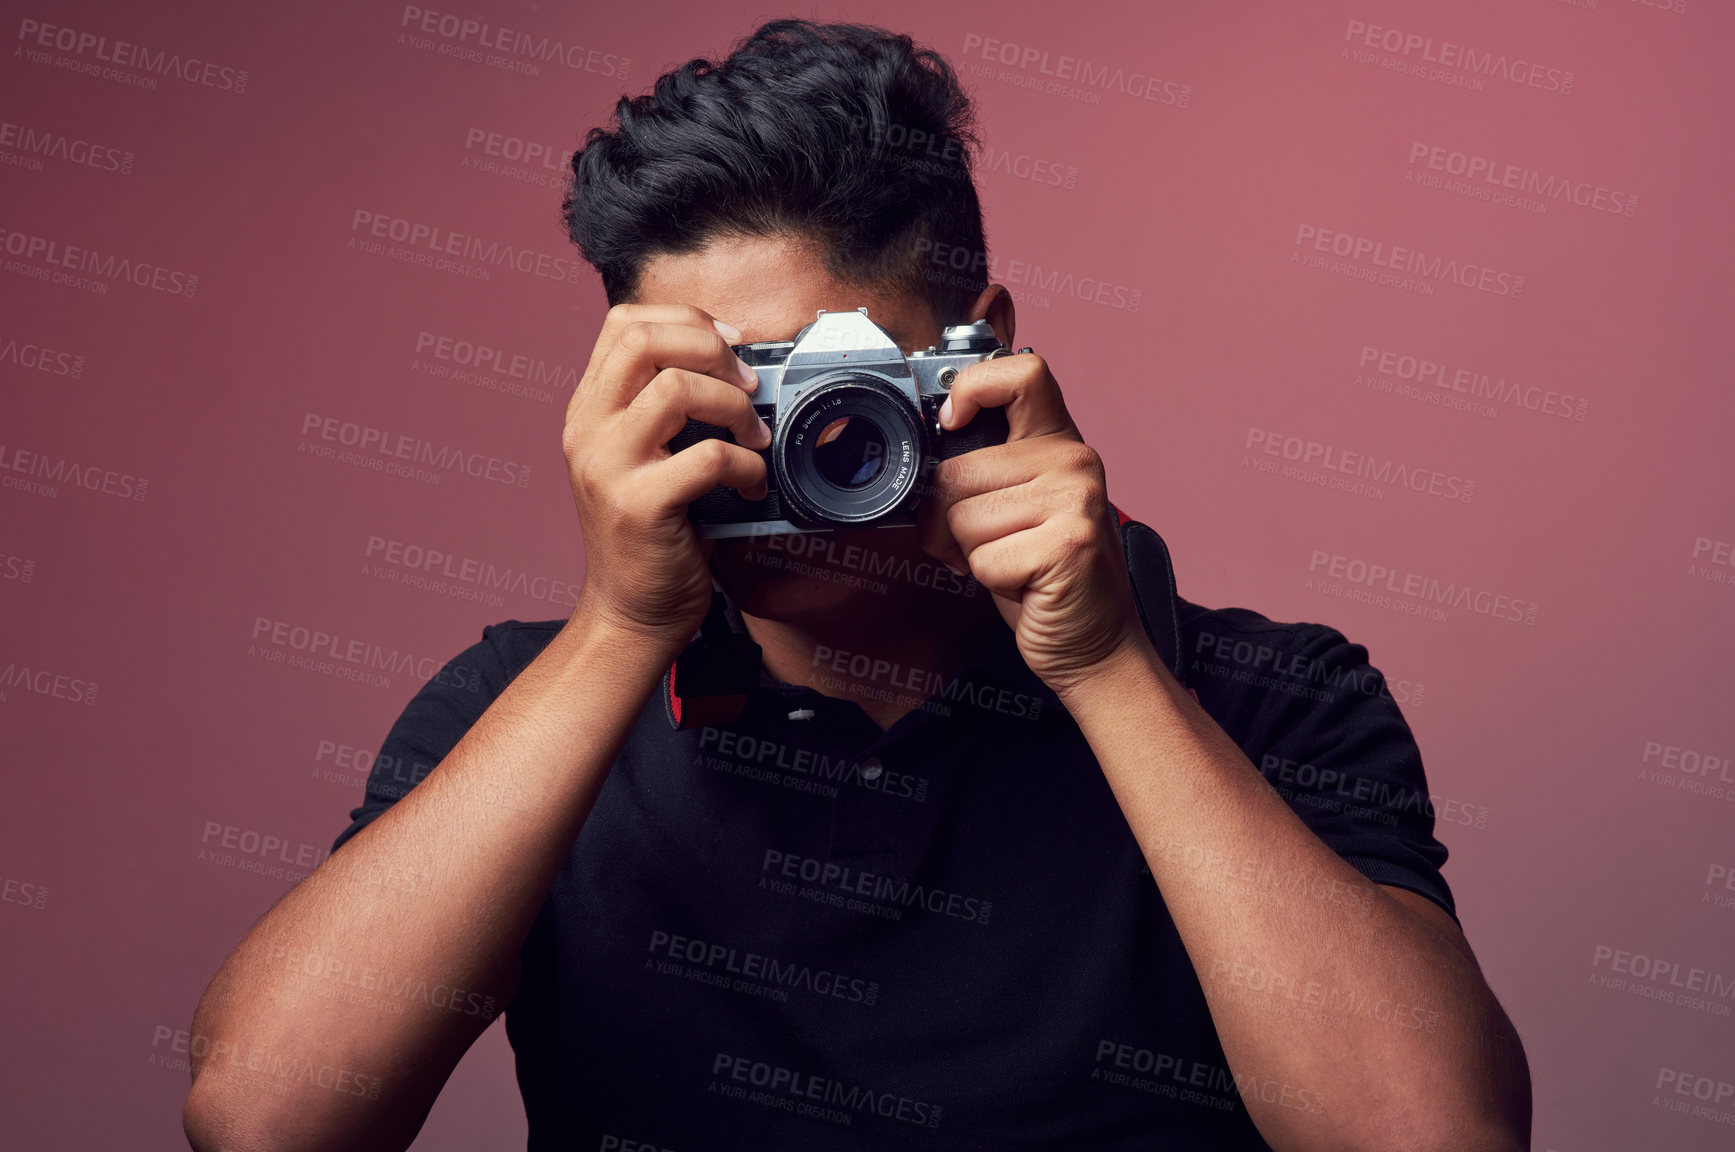 Buy stock photo Studio shot of a young man holding up a camera